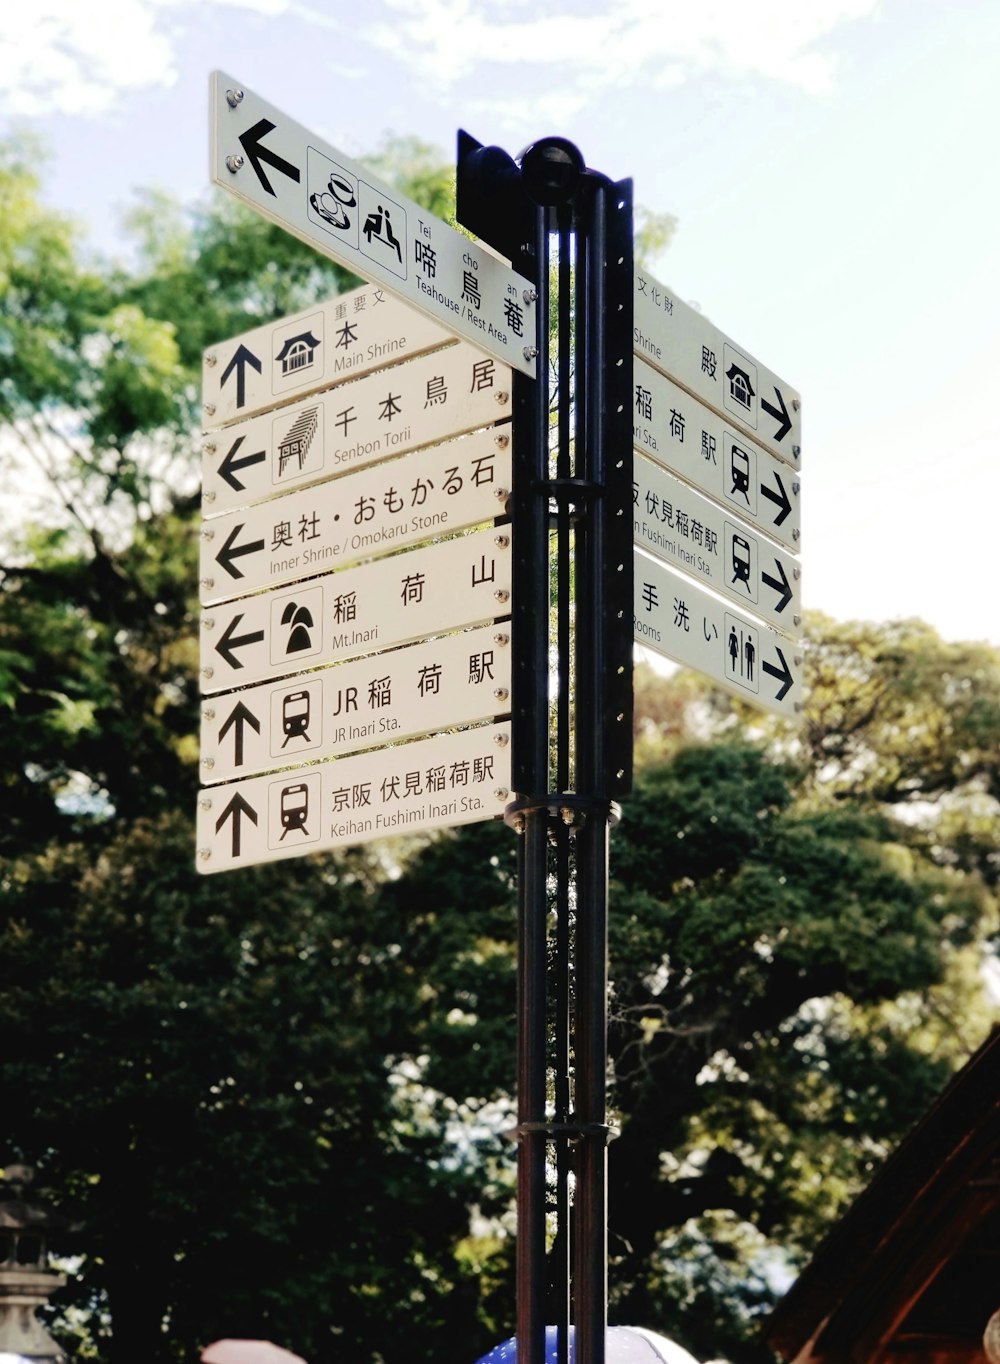 black and white street sign